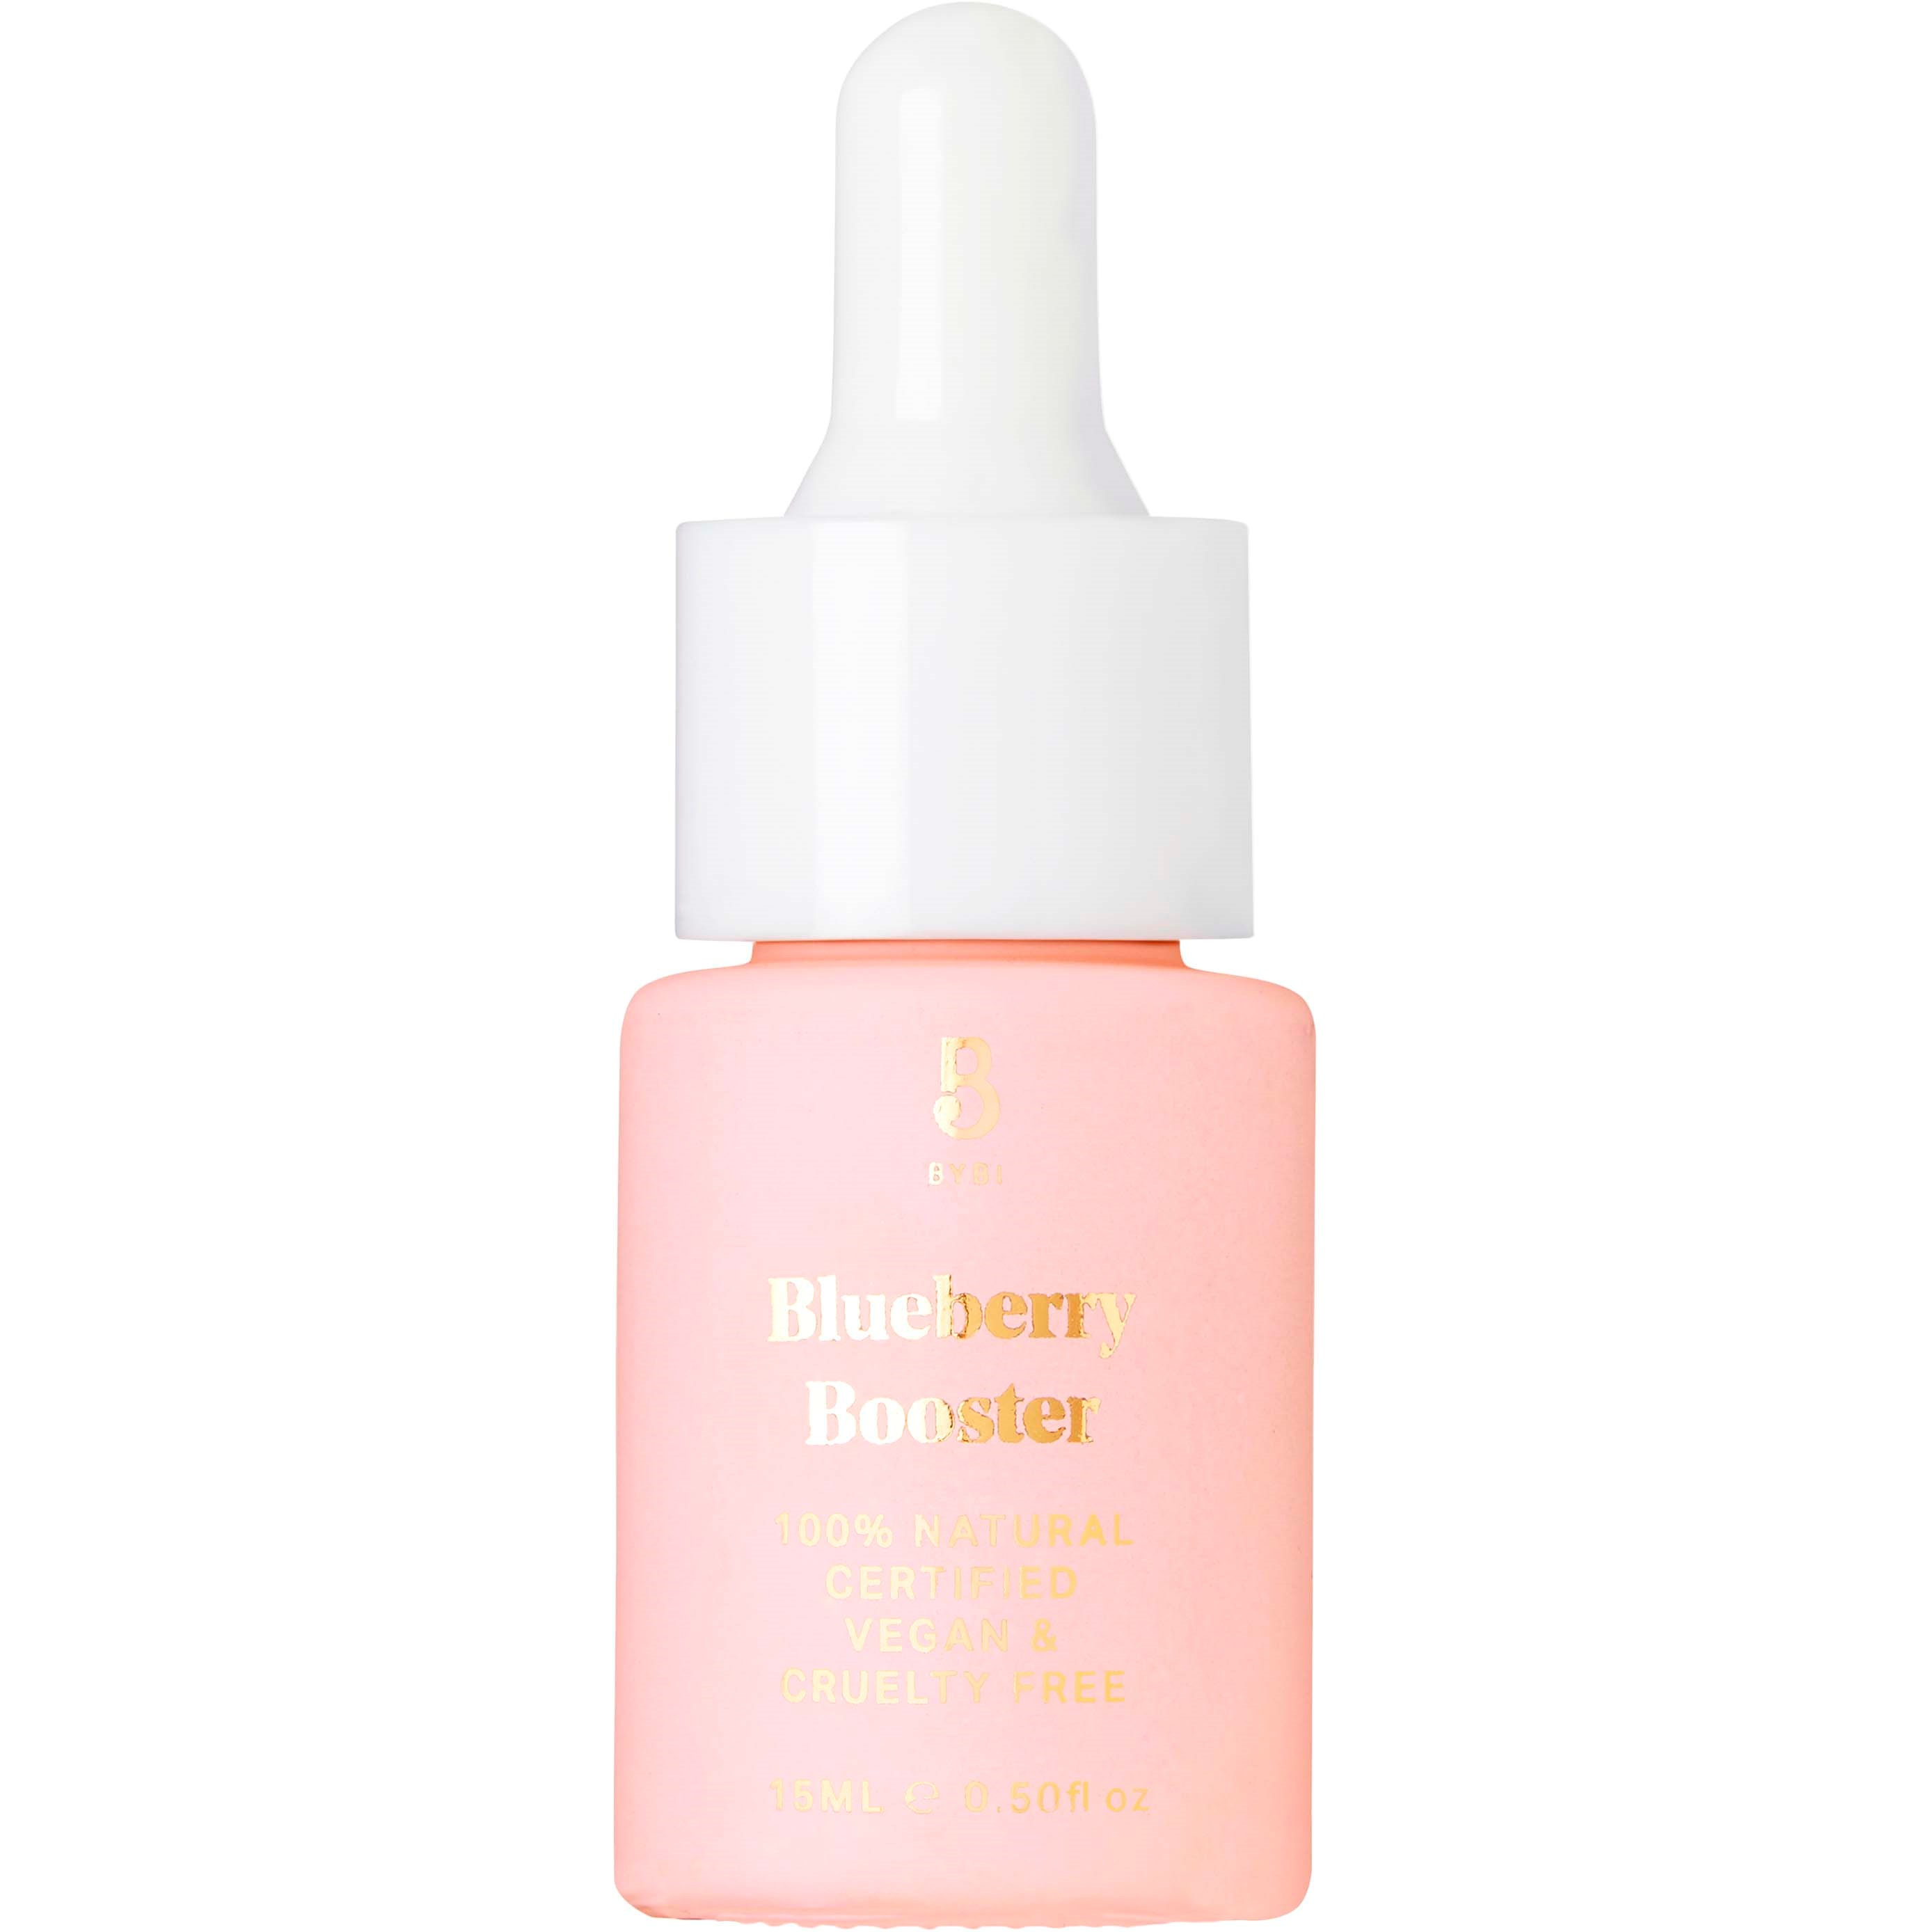 BYBI Beauty Blueberry Booster, 15 ml